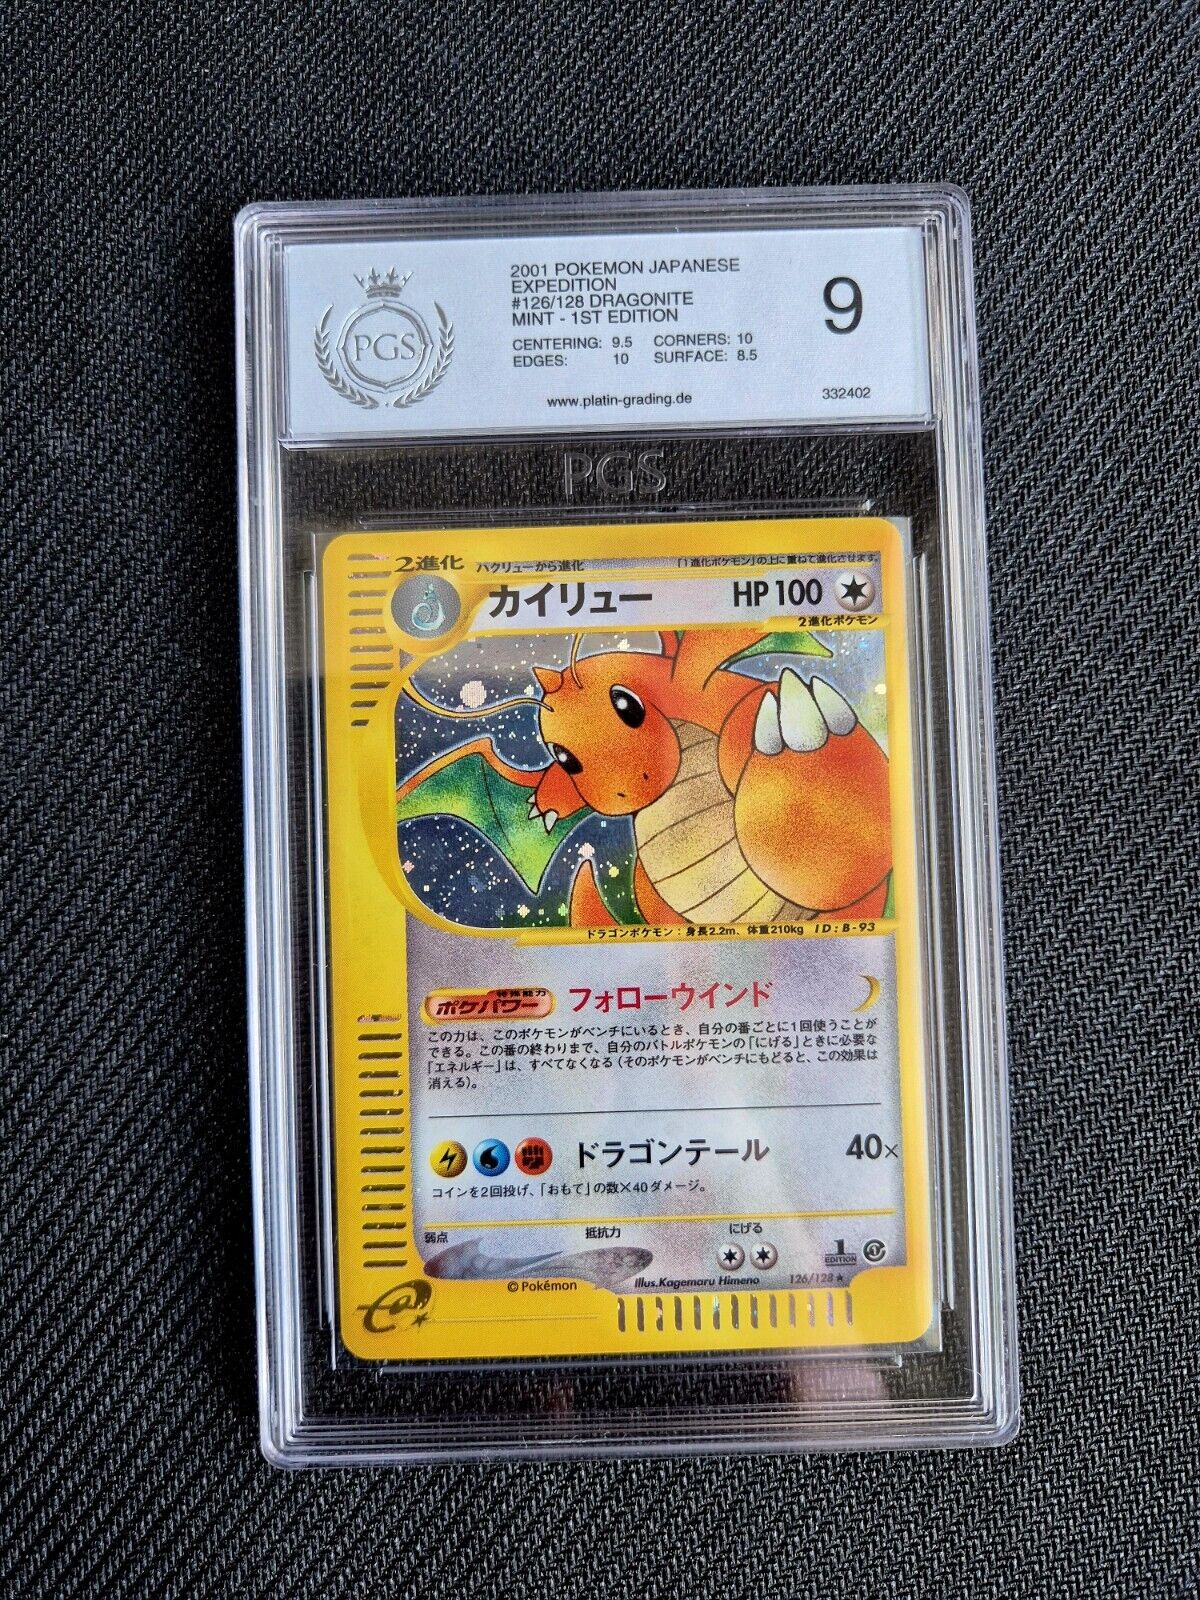 Pokemon TCG Card Dragonite Expedition 1ST Edition Japanese PGS 9 MINT PSA